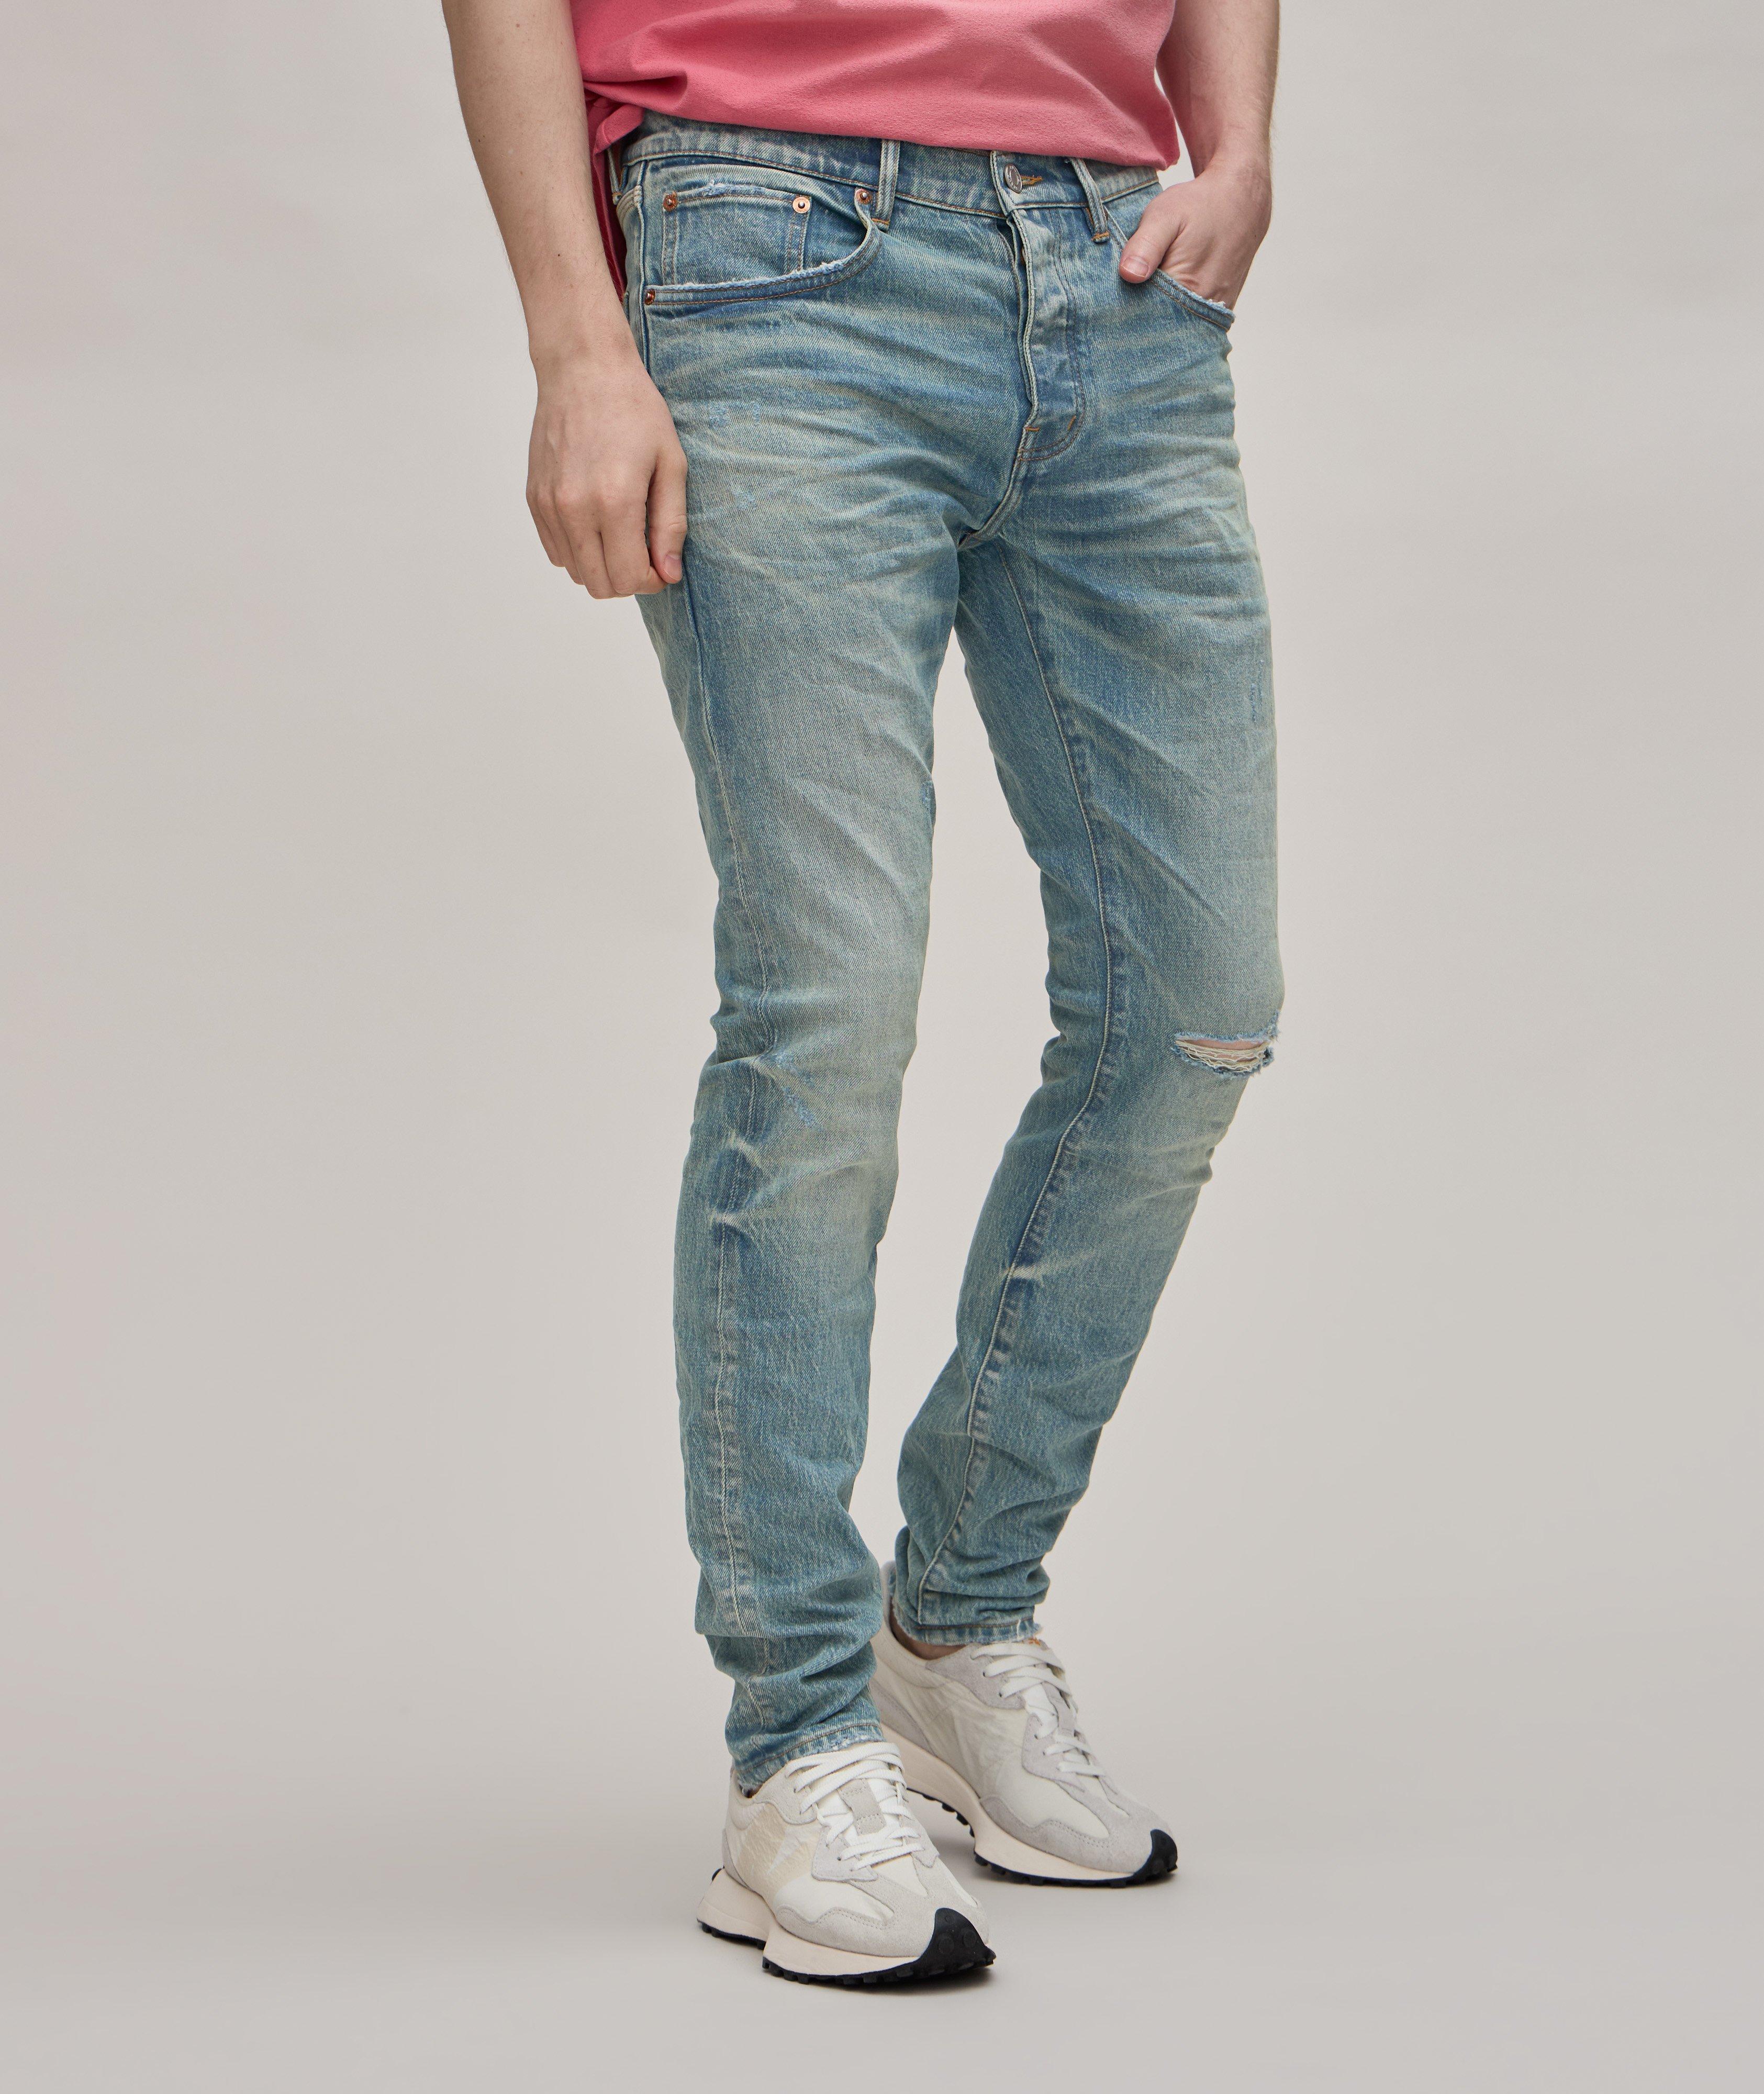 P001 Aged Ripped & Distressed Jeans  image 1